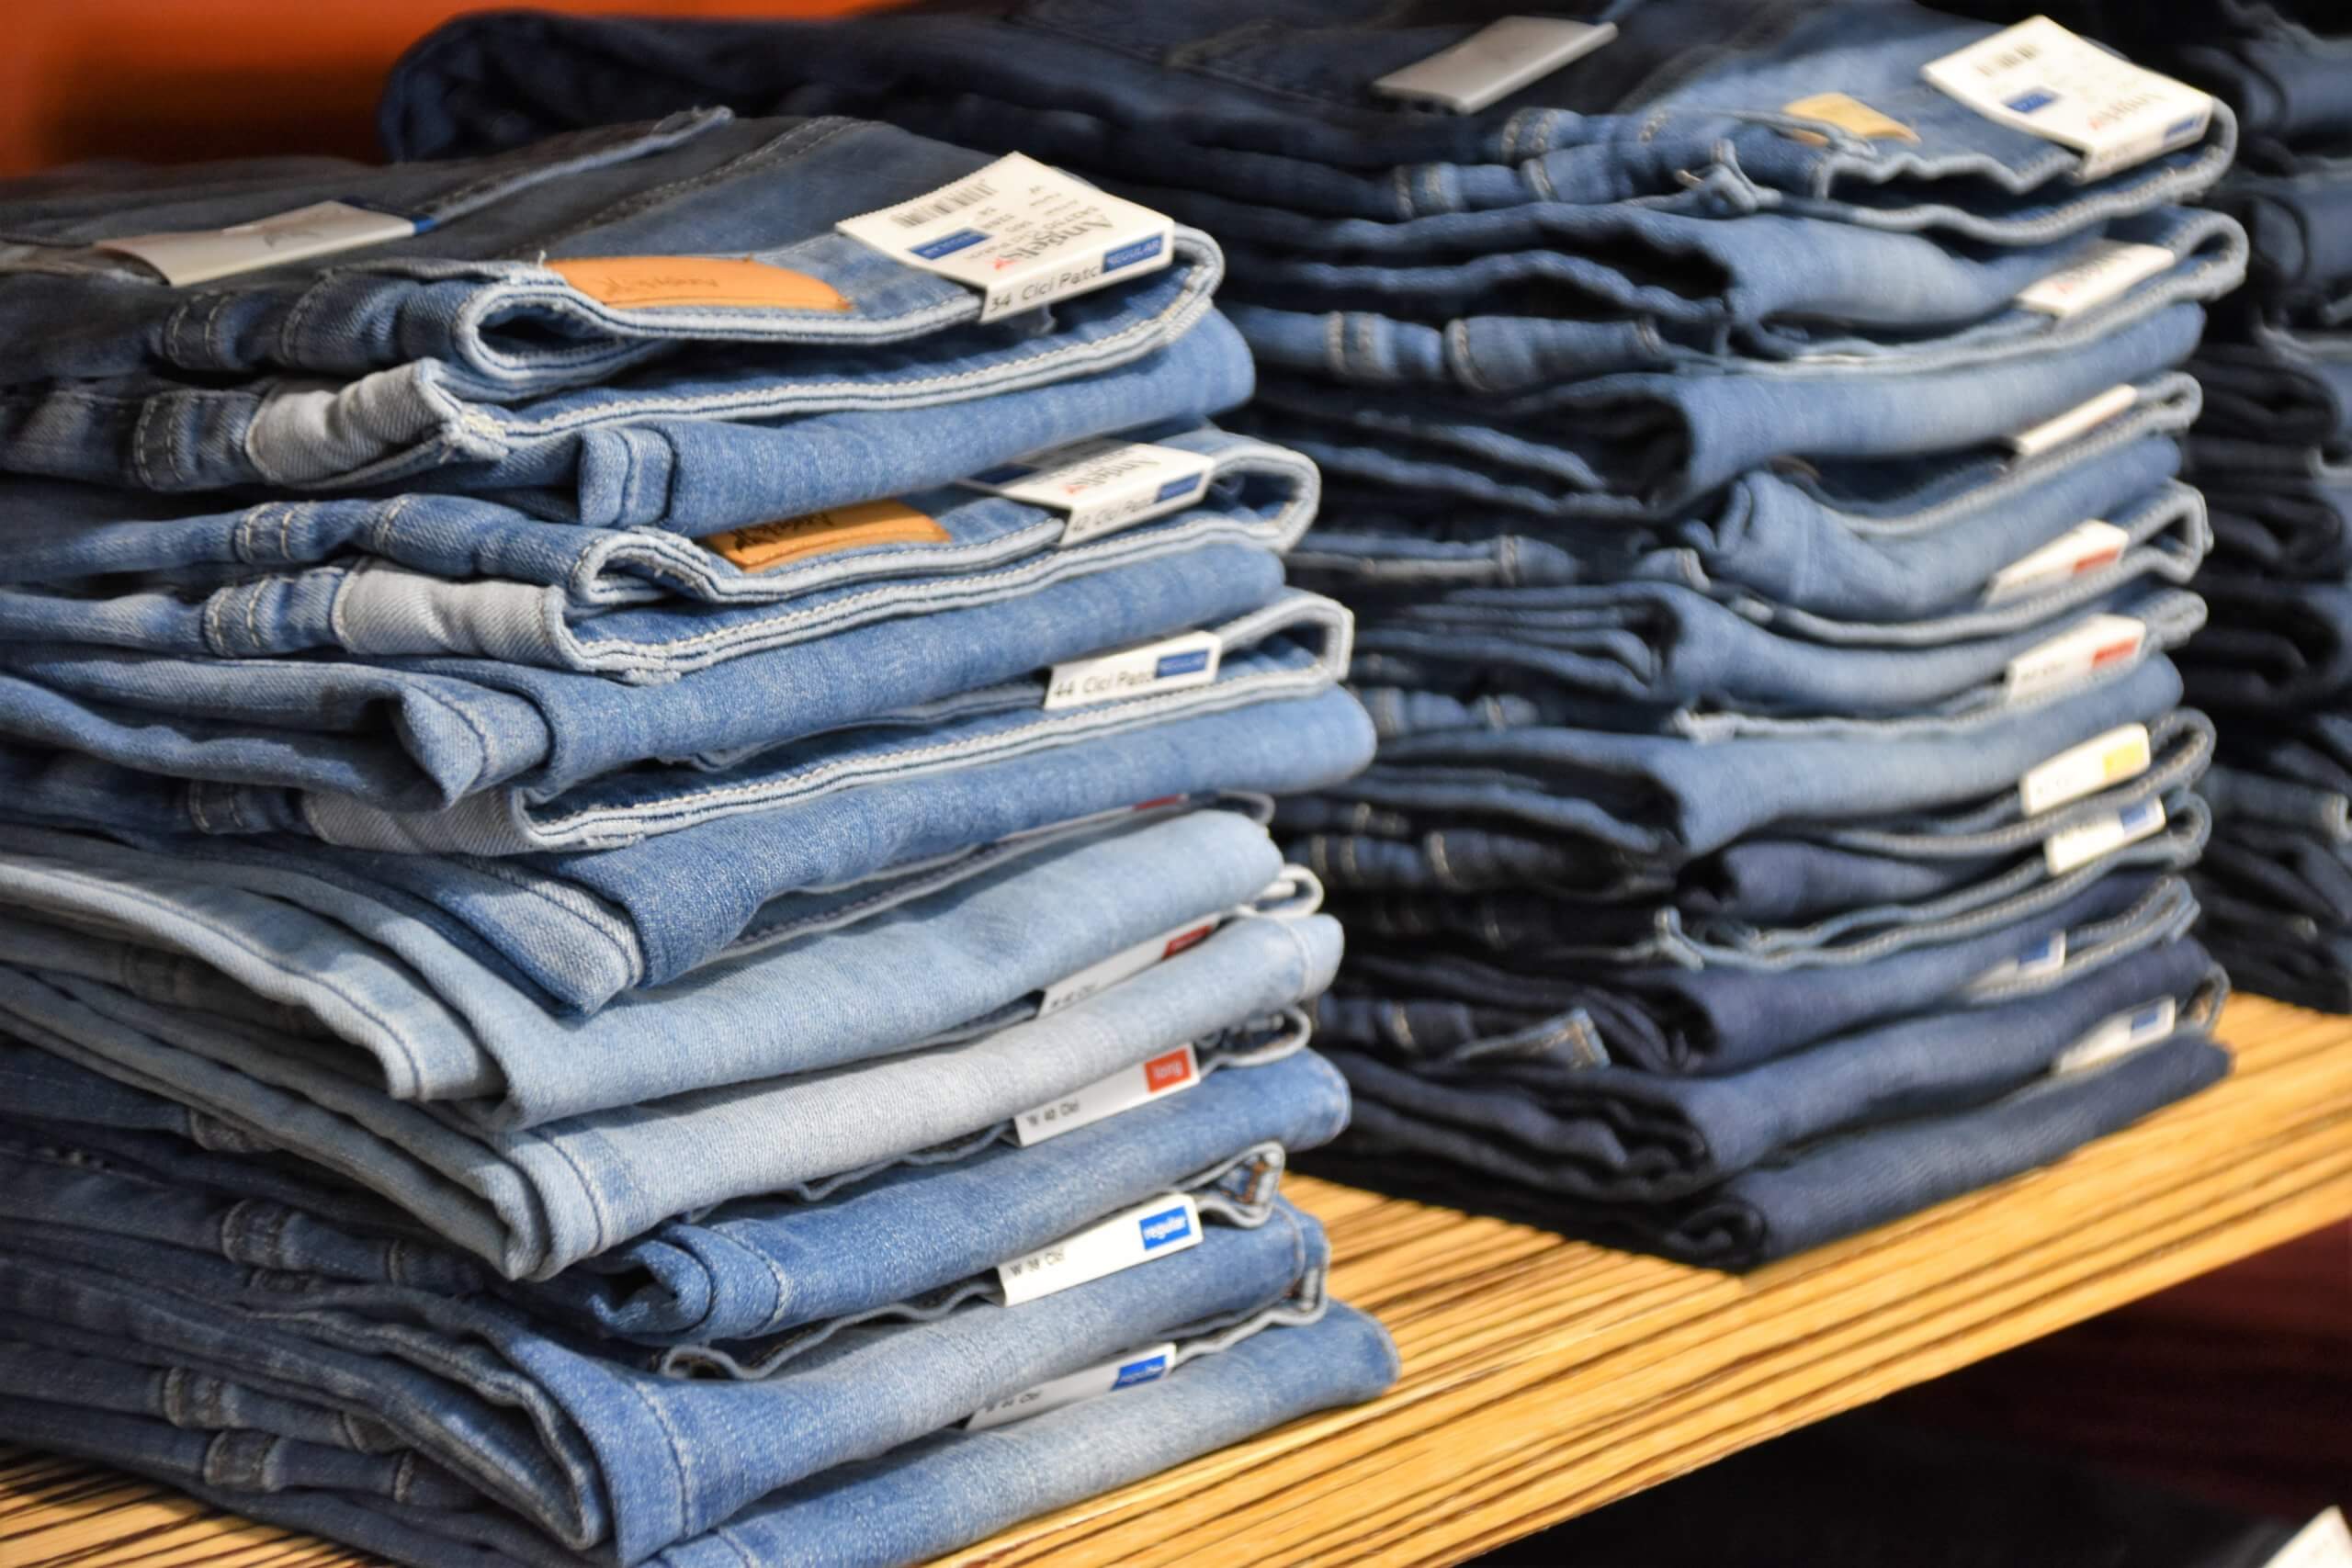 A stack of Wrangler Jeans